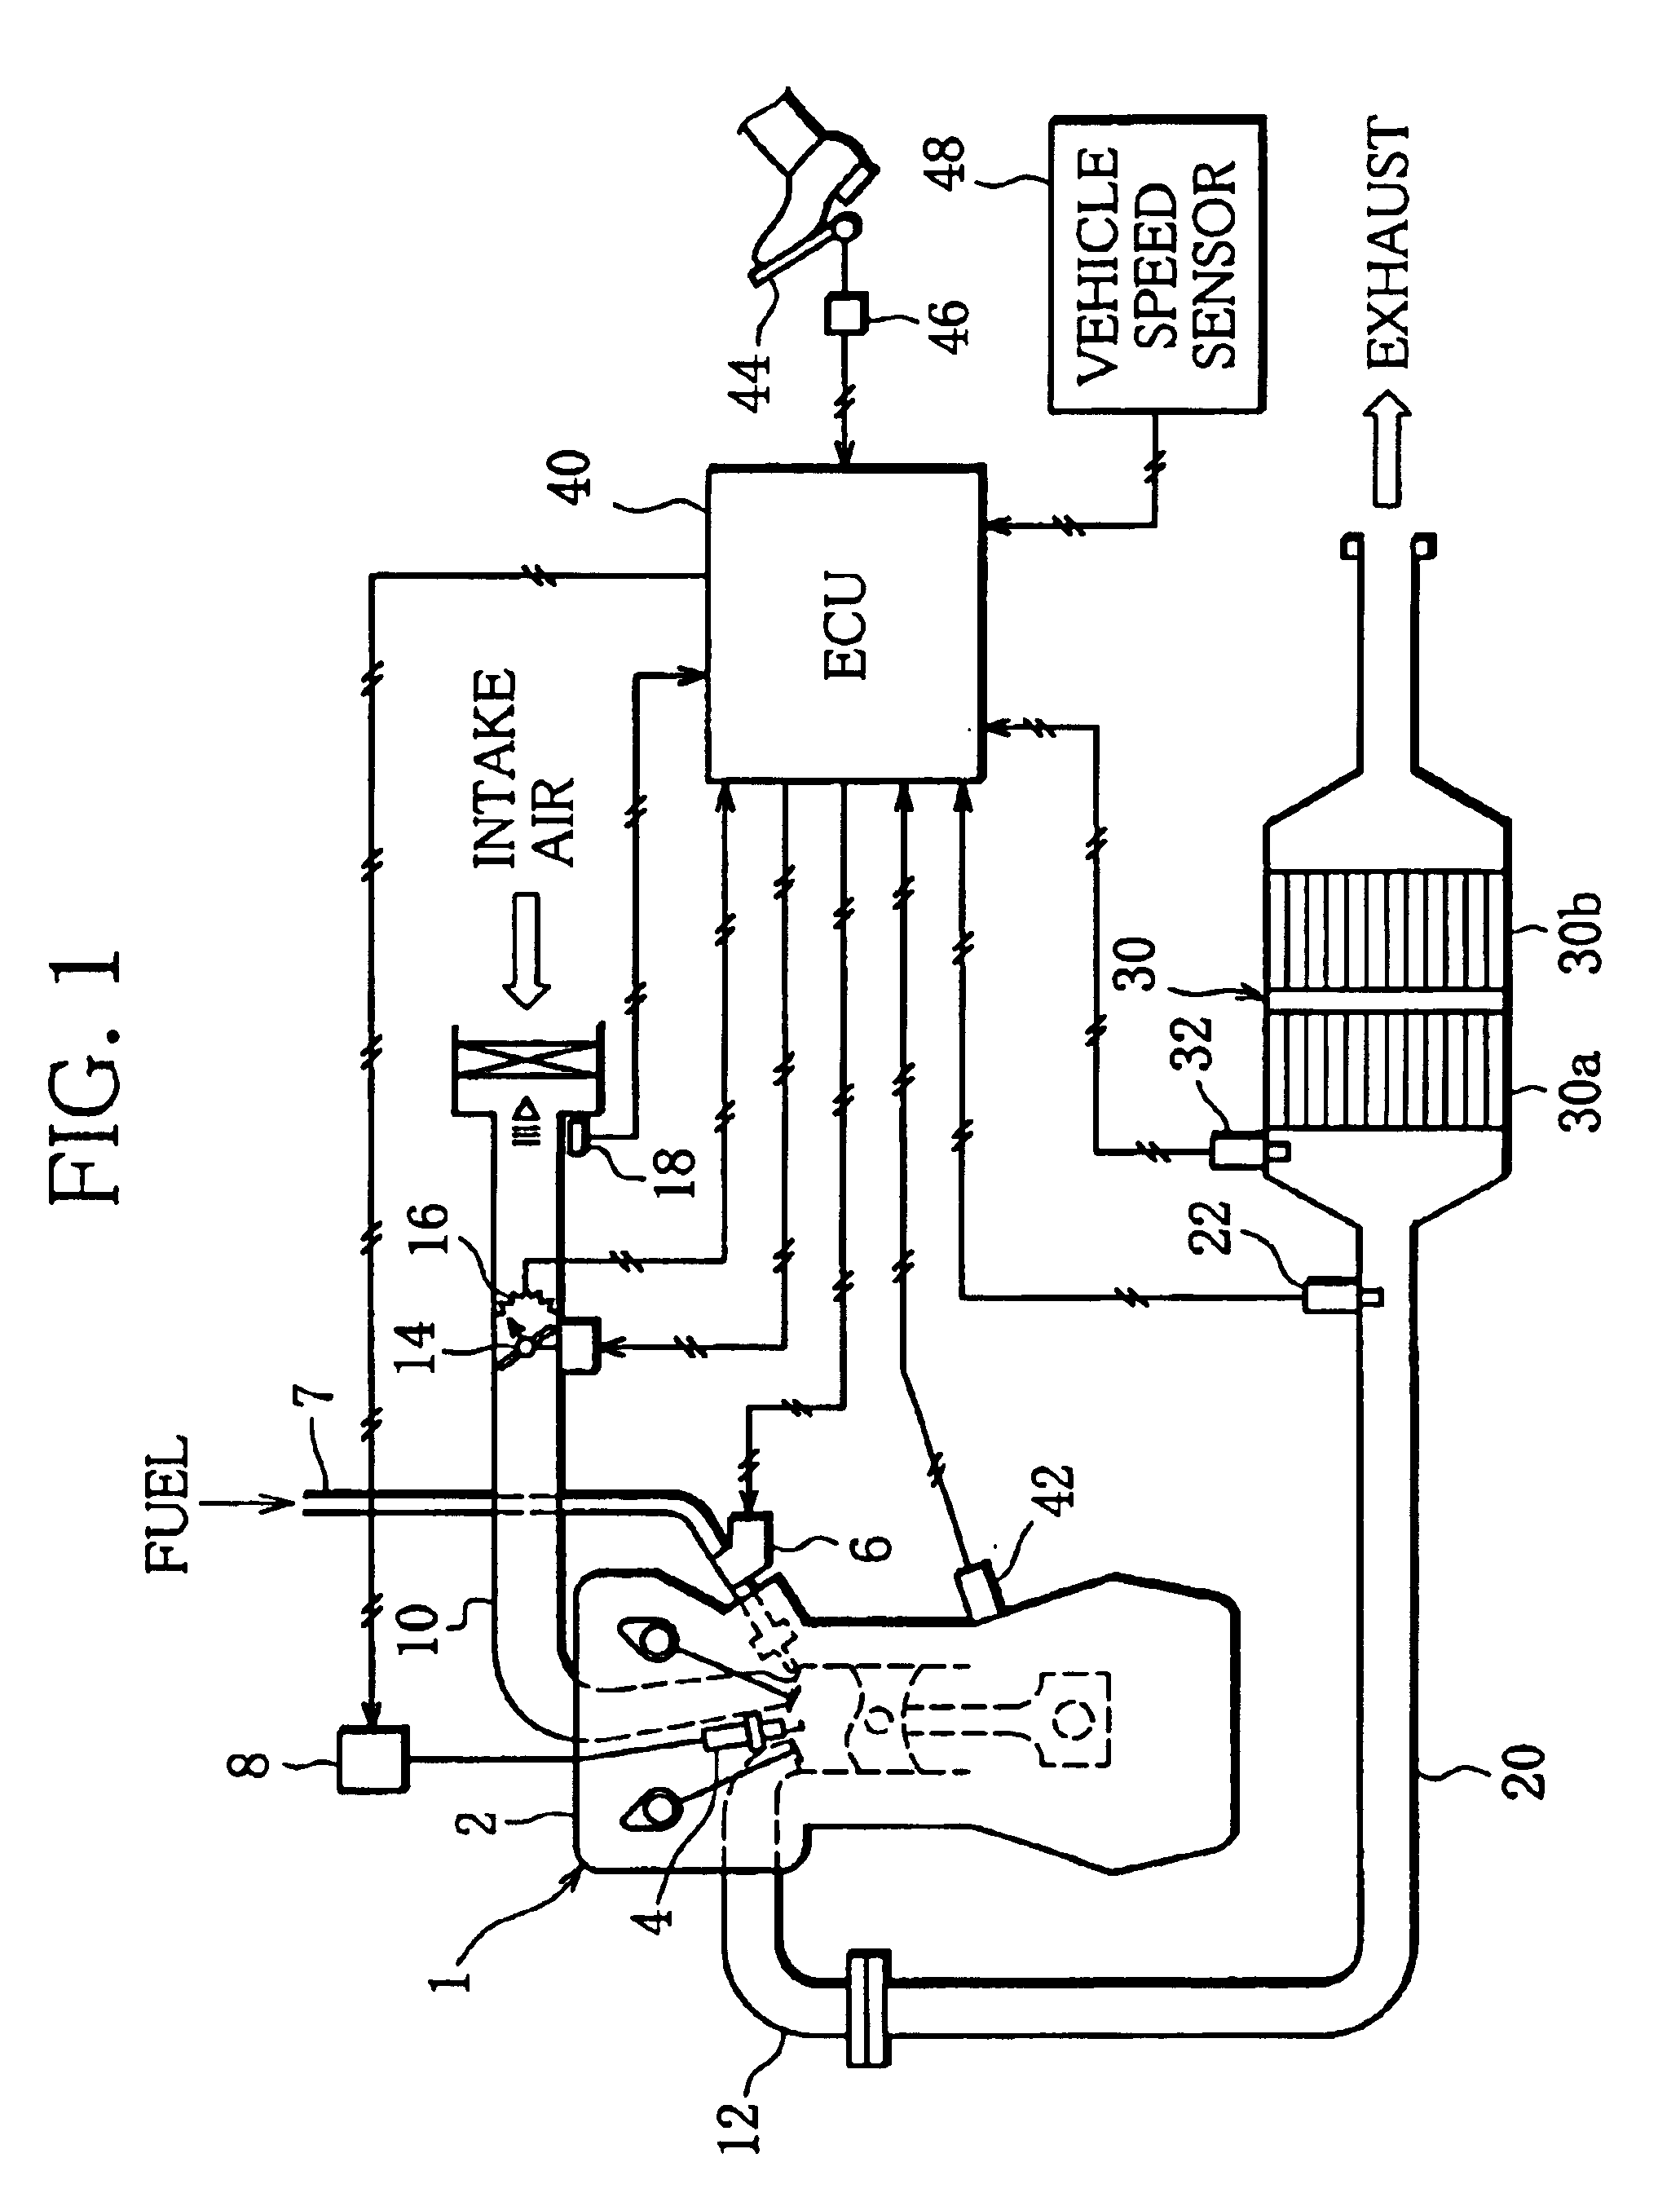 Exhaust emission control device of internal-combustion engine